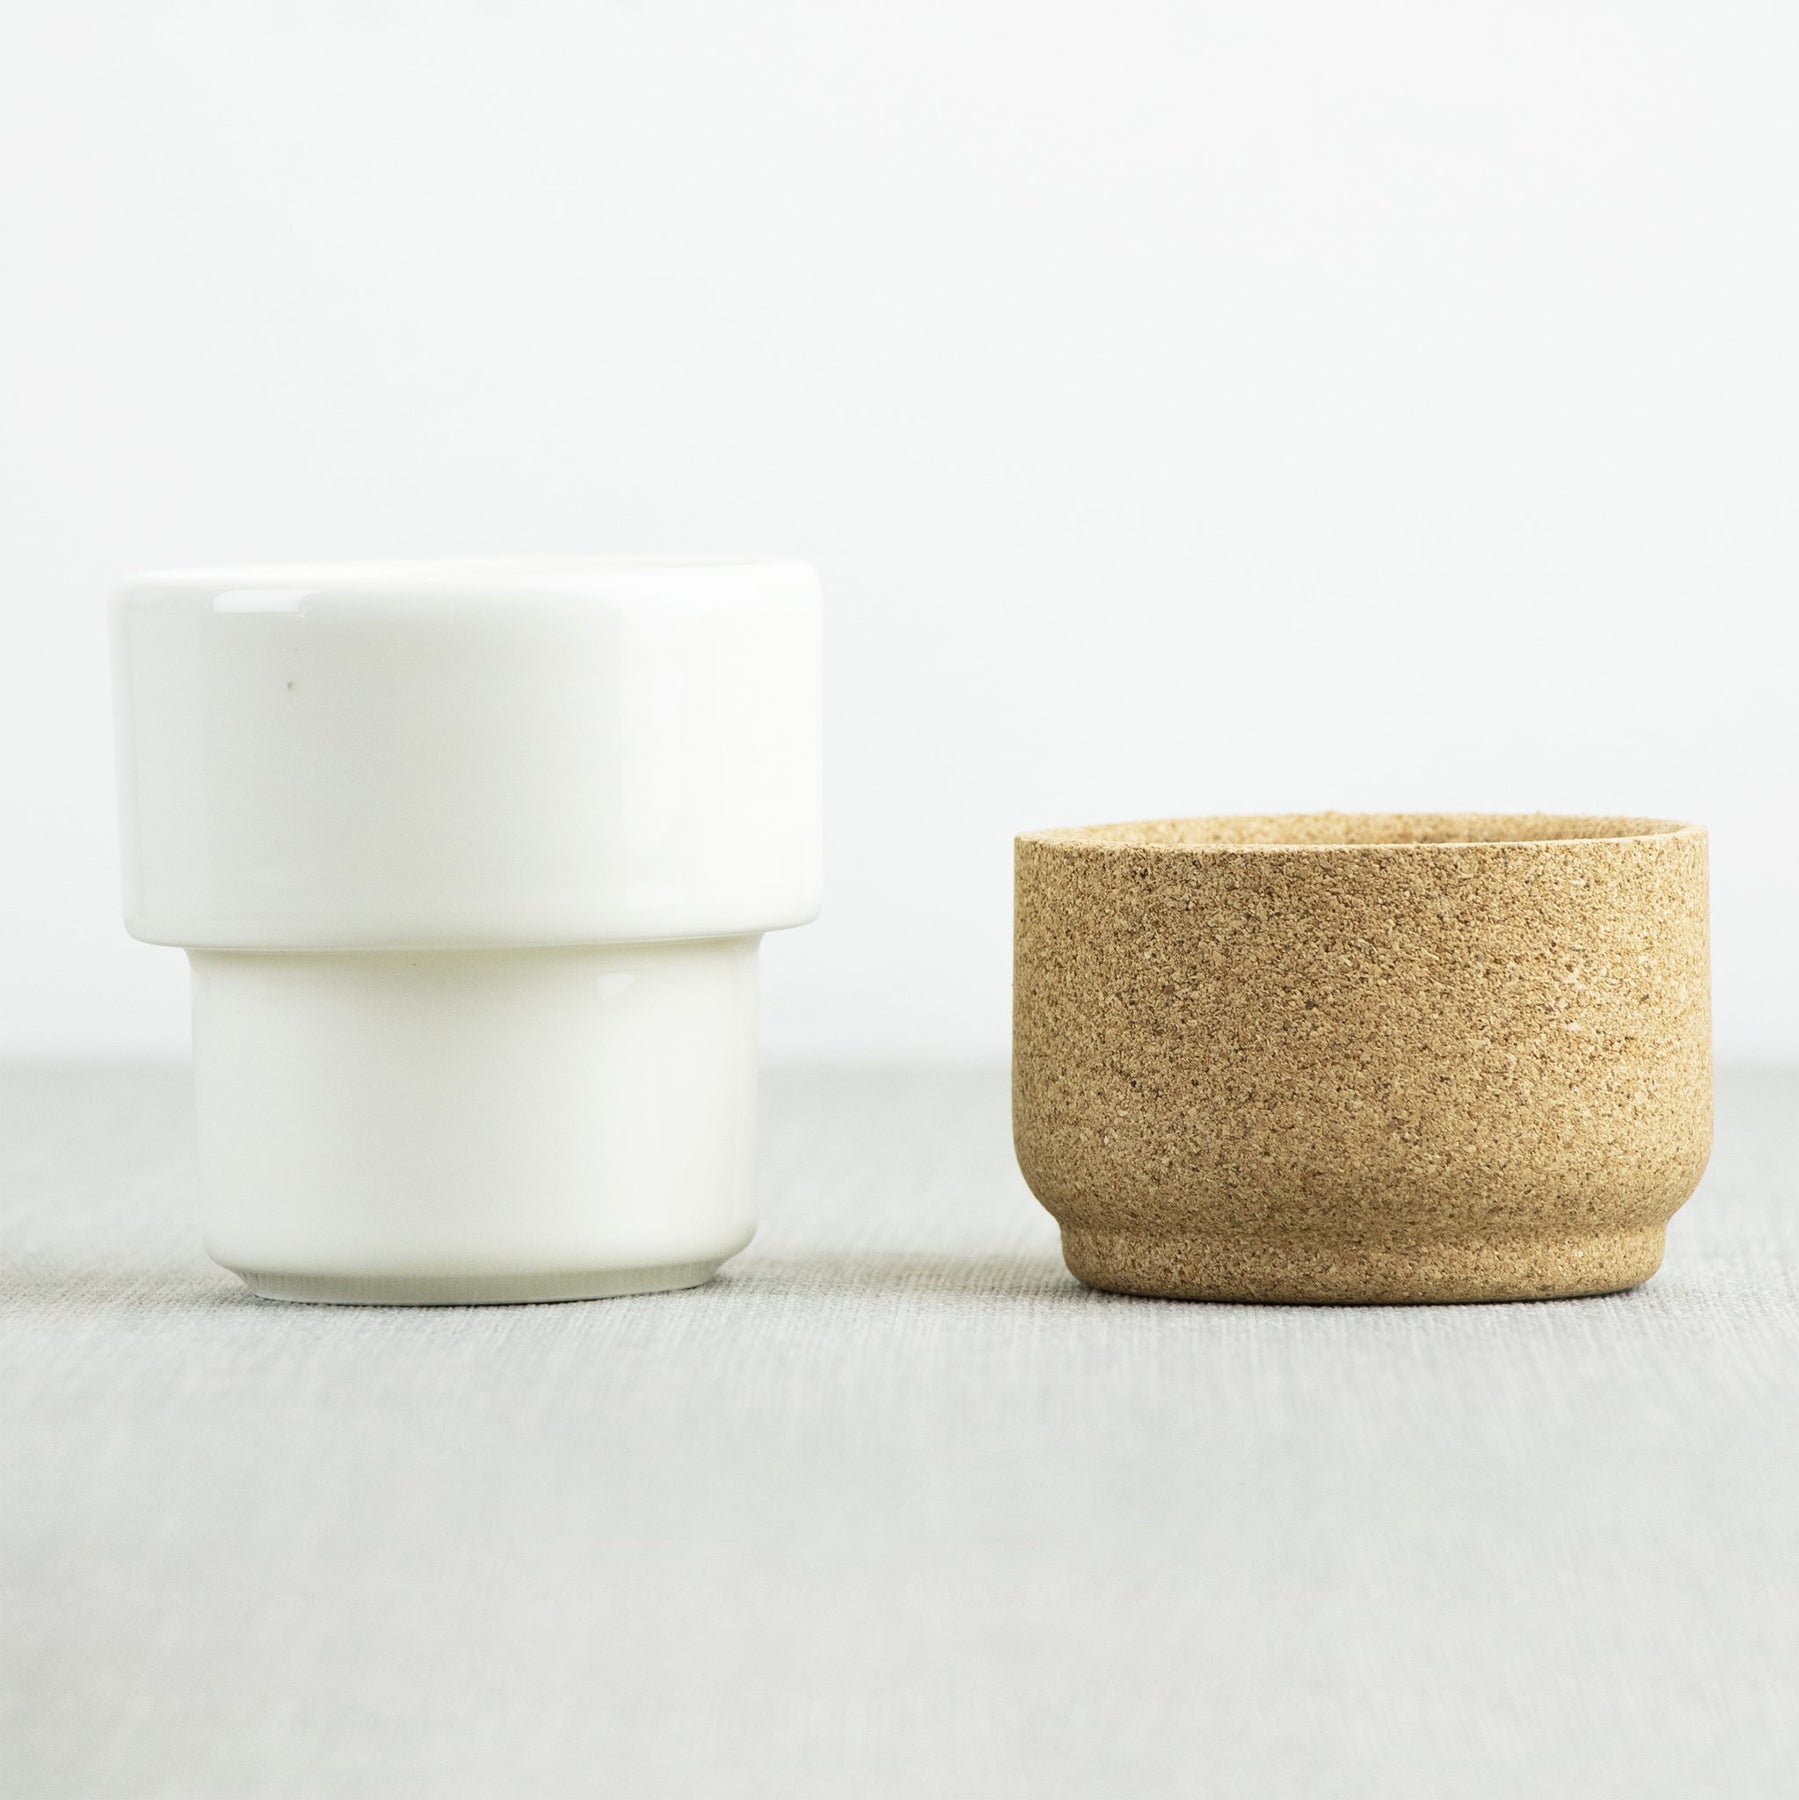 The separate parts of the handleless mug, ceramic and cork